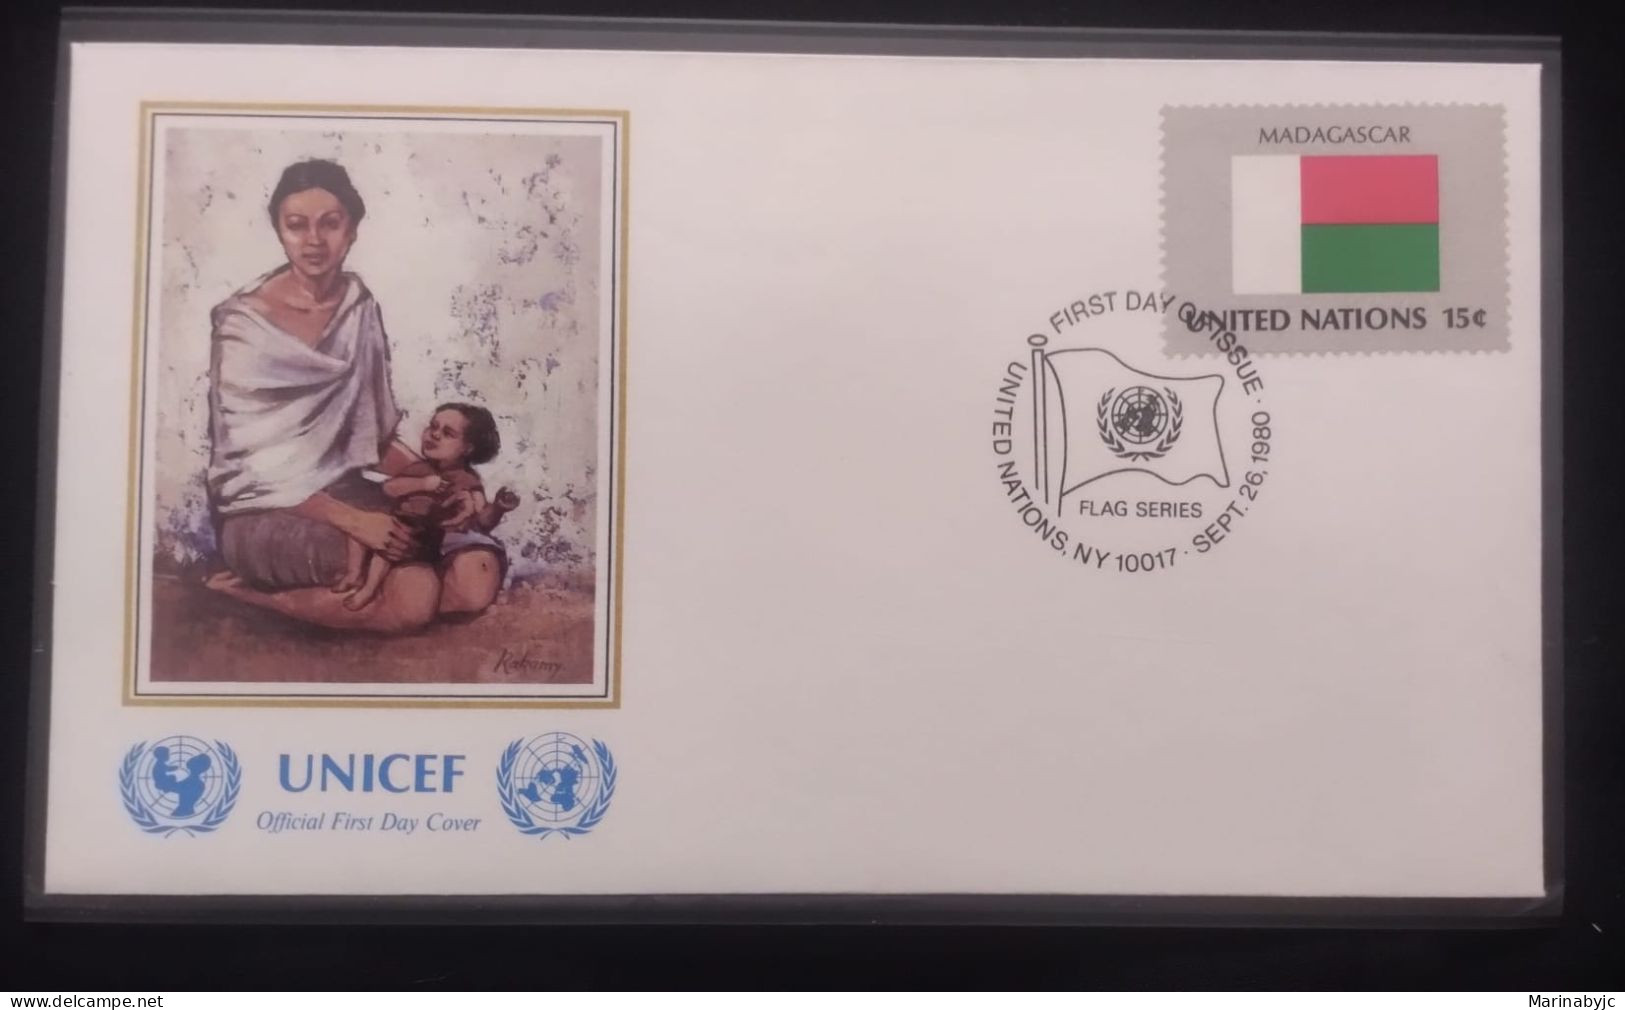 EL)1980 UNITED NATIONS, NATIONAL FLAG OF THE MEMBER COUNTRIES, MADAGASCAR, UNICEF, MOTHER AND BABY, FDC - Unused Stamps